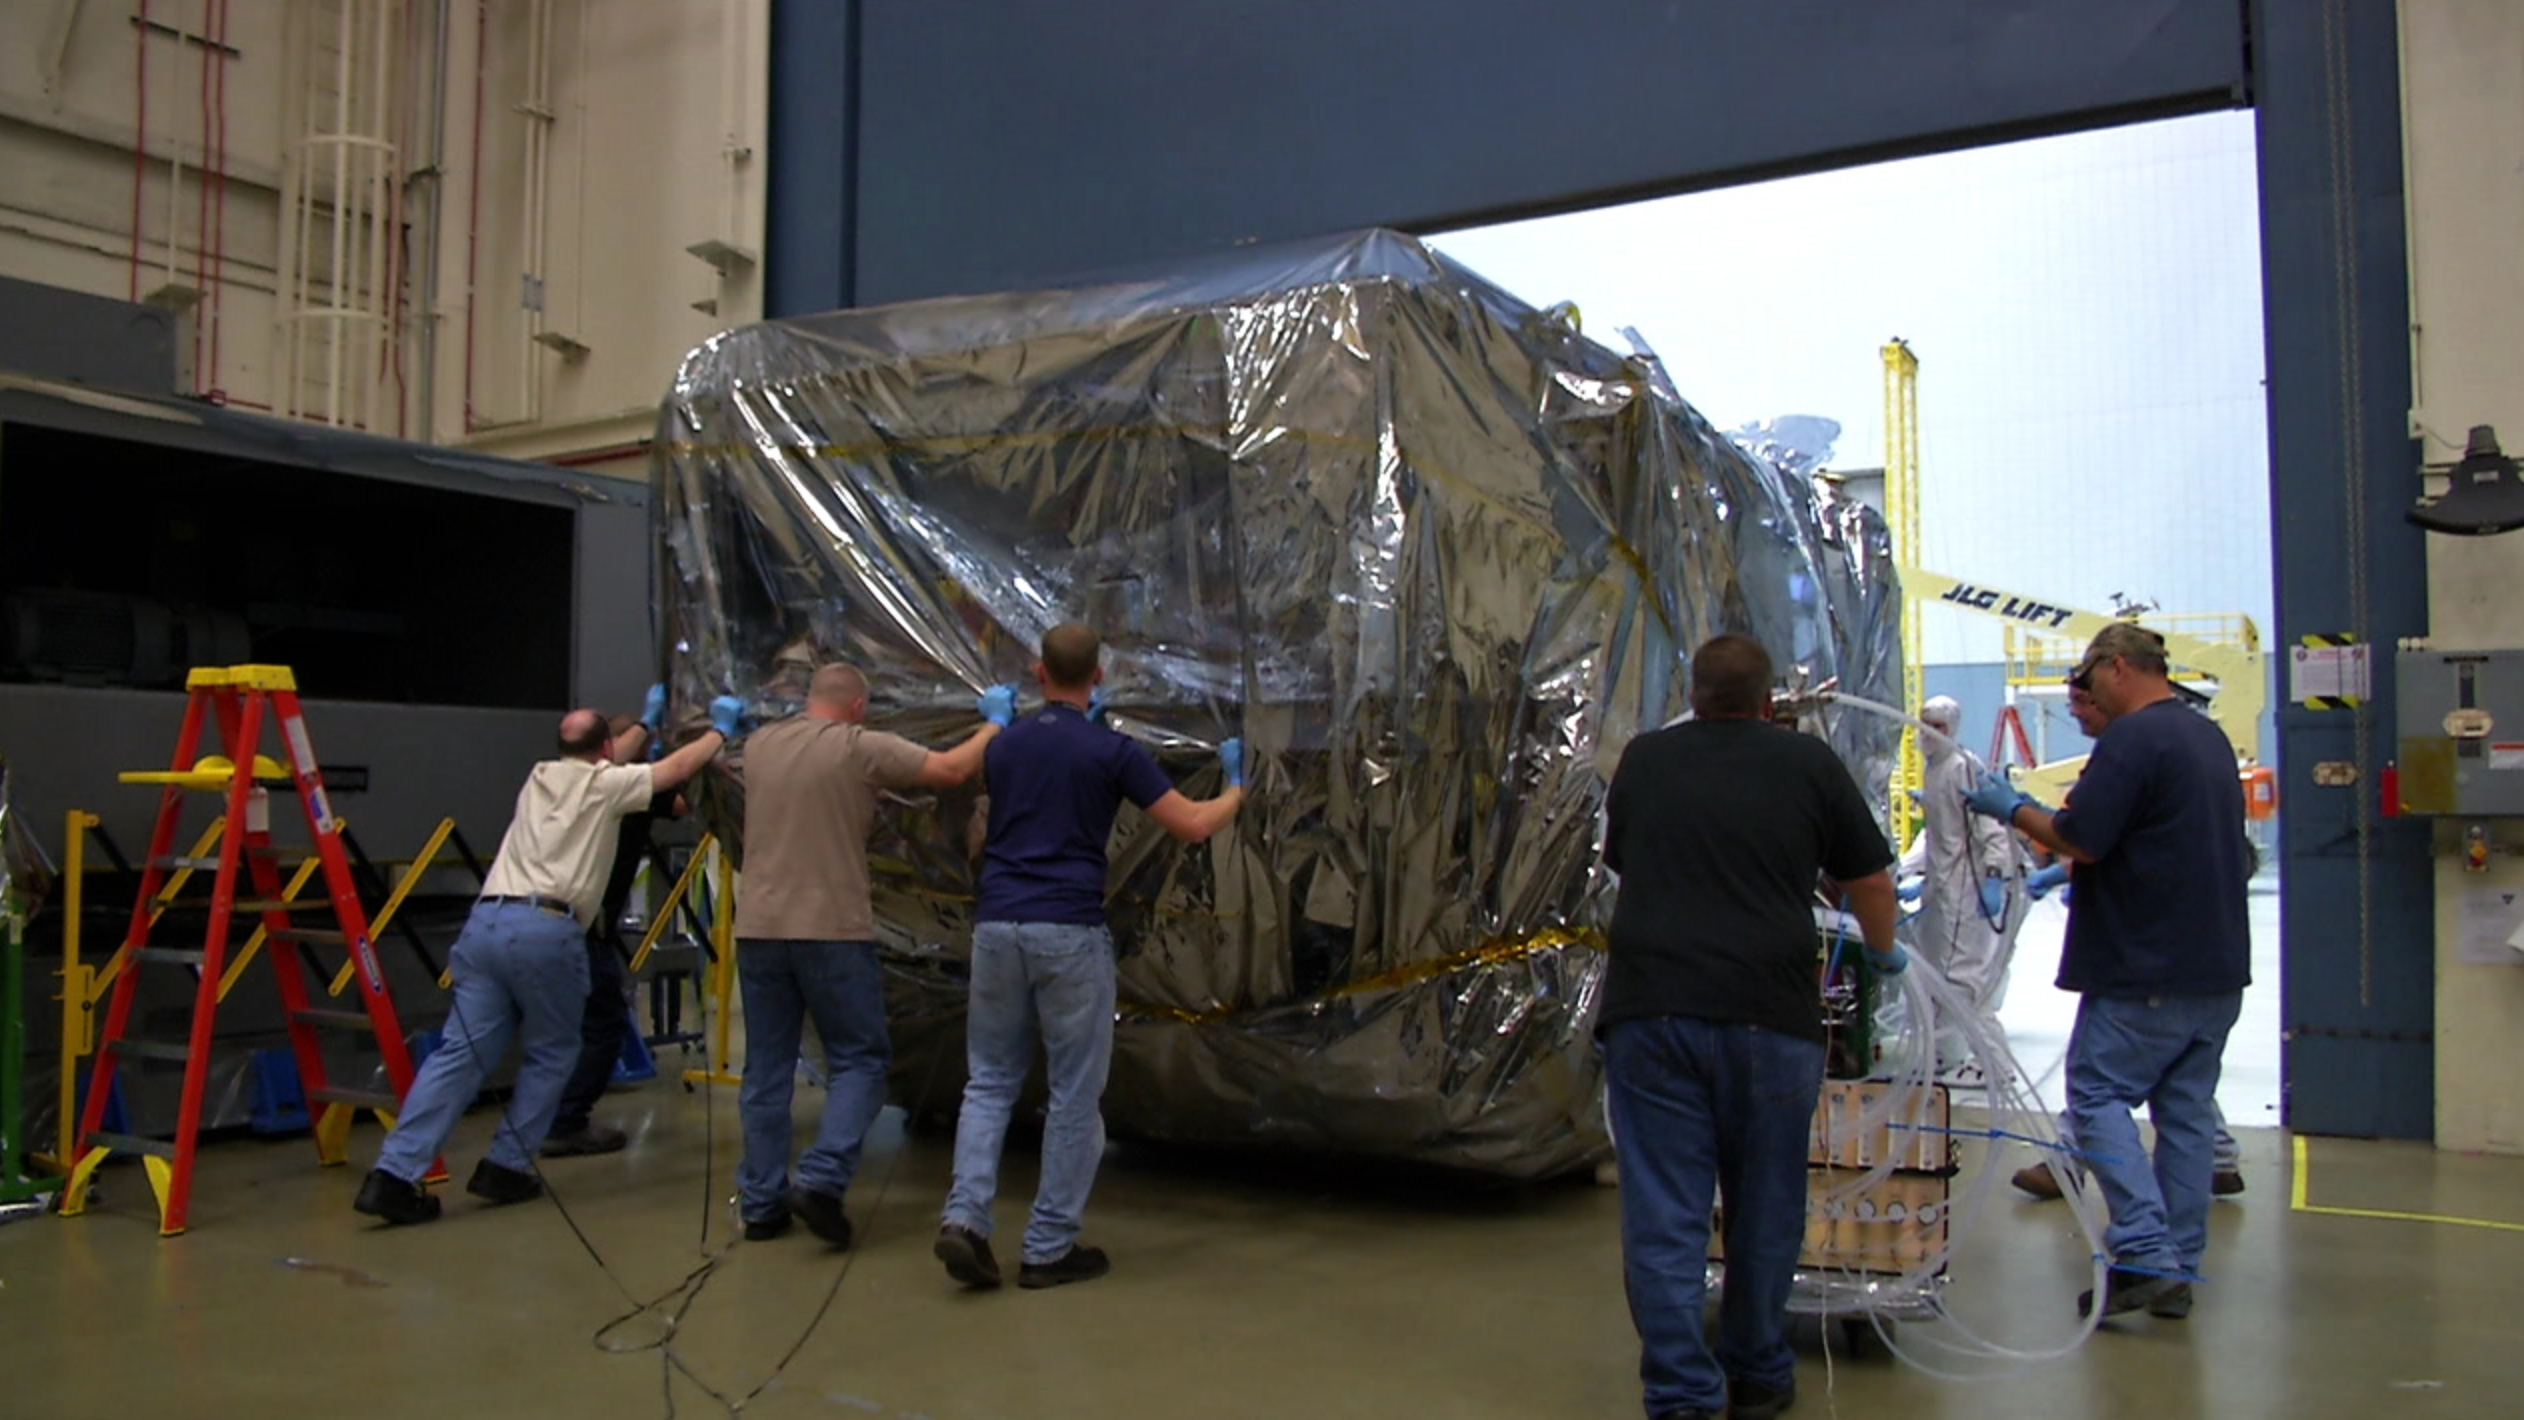 B-roll video of Webb Telescope’s ISIM structure being removed from the large cryogenic vacuum chamber at NASA Goddard Space Flight center, called the Space Environment Simulator (SES).   After ISIM is lifted out of the vacuum chamber, engineers move the wrapped ISIM structure into the clean room. 